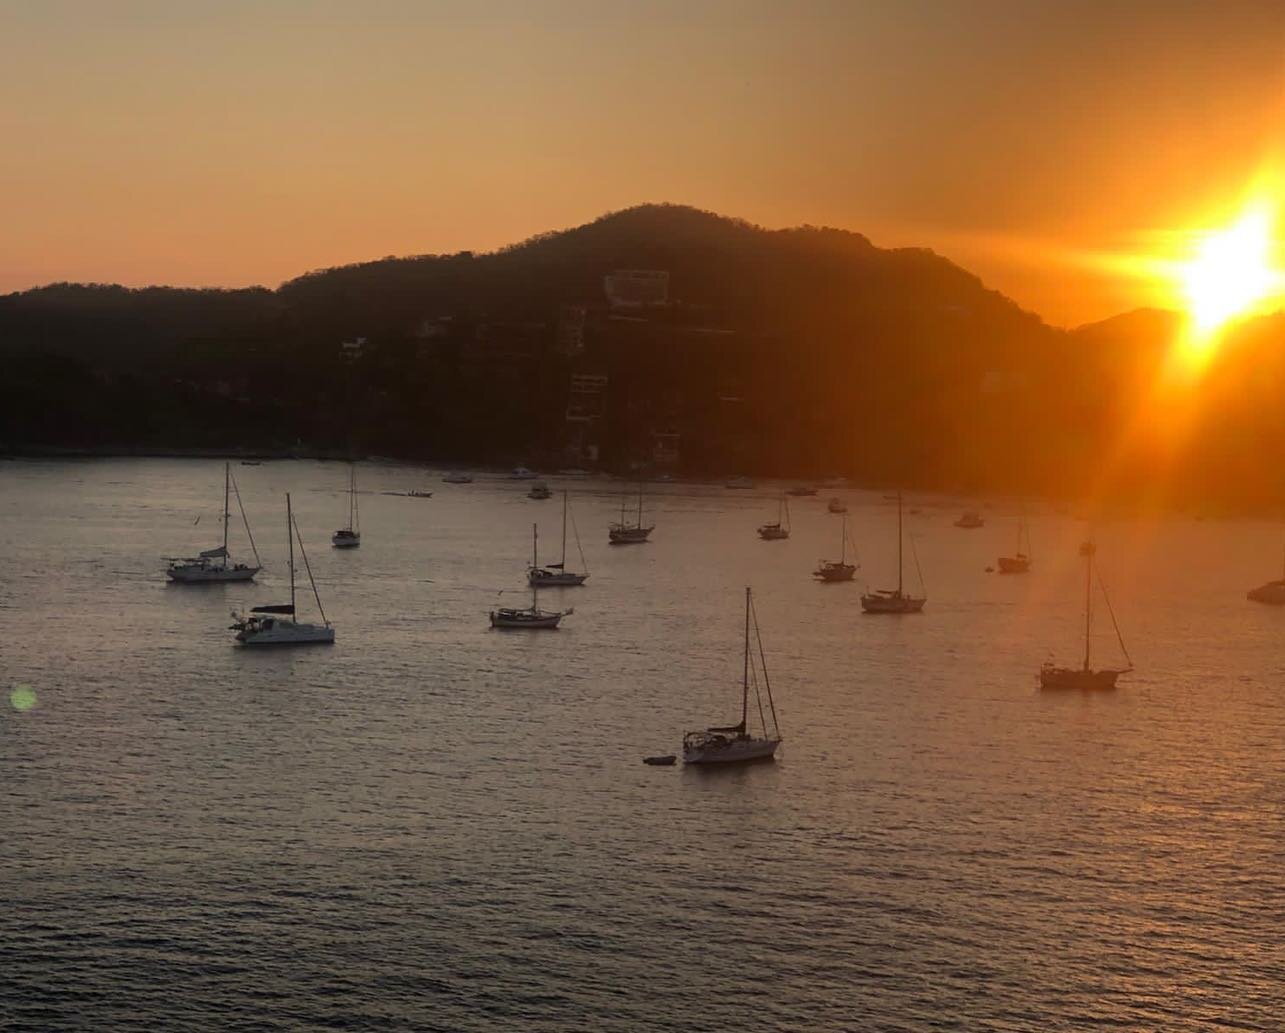 Almost two weeks after stopping at Zihuatanejo, expecting to just stay a couple days, we&rsquo;ll be bidding it &lsquo;Hasta Luego&rsquo; in the morning. We&rsquo;ve completely adored this unique part of Mexico, and are certain we&rsquo;ll be returni